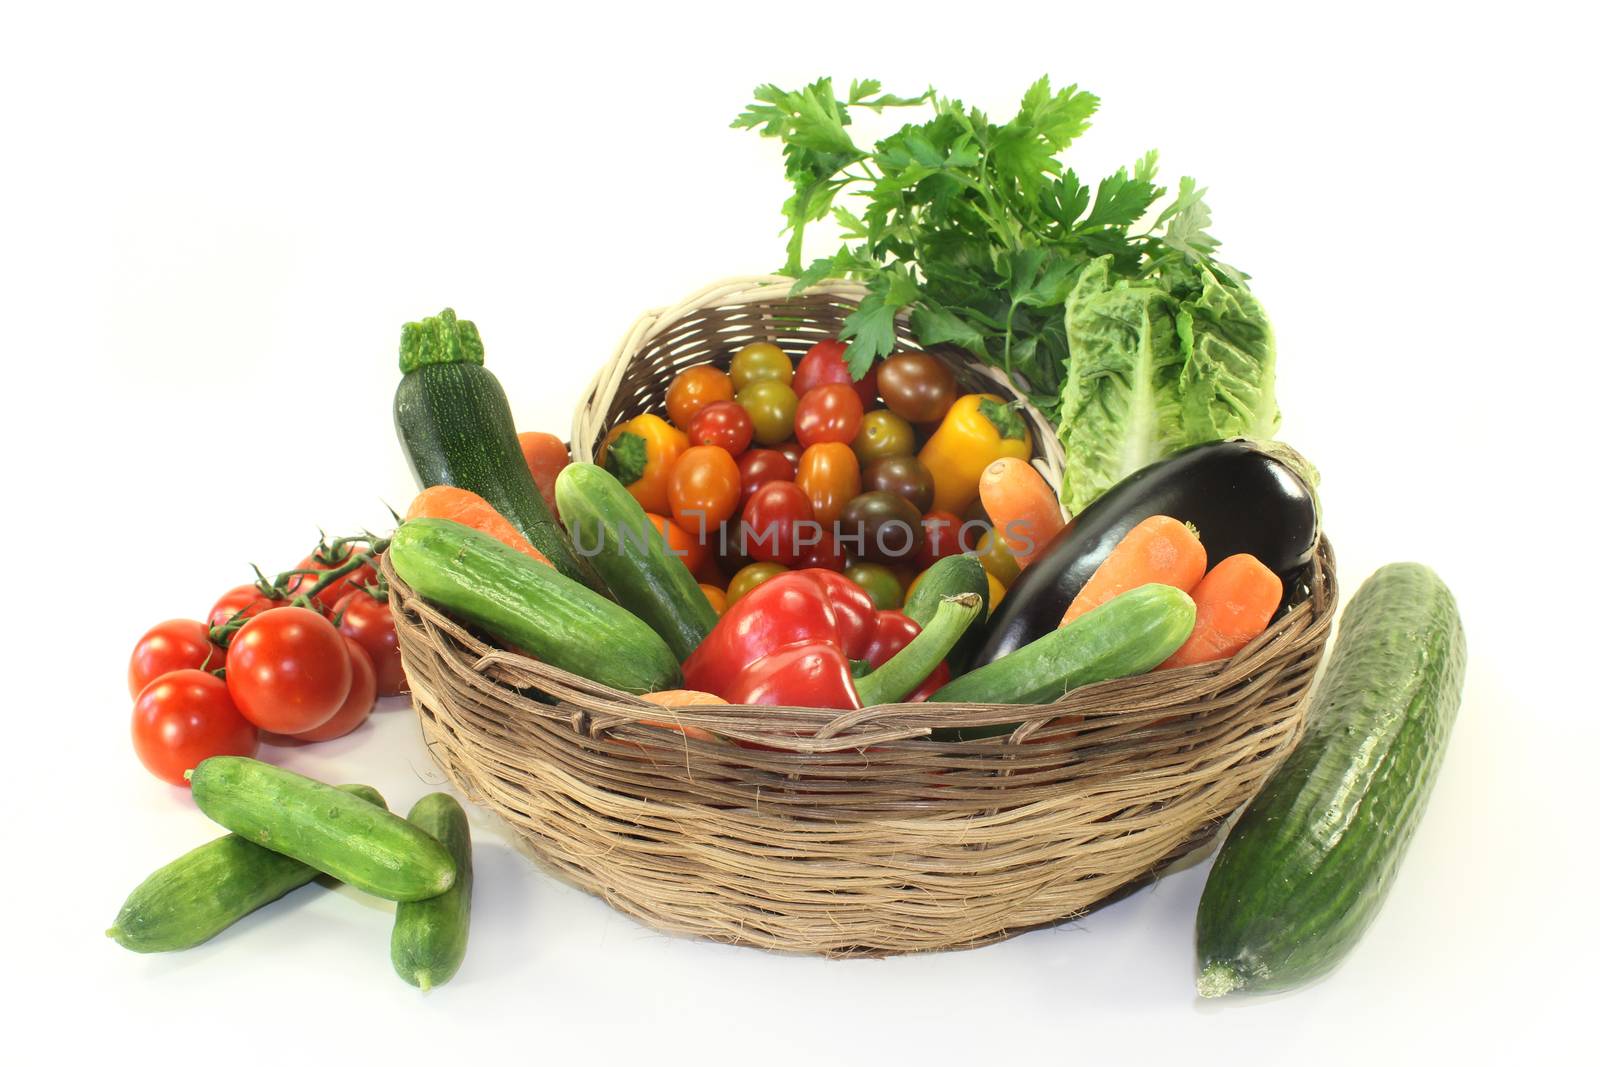 different types of vegetables in a basket